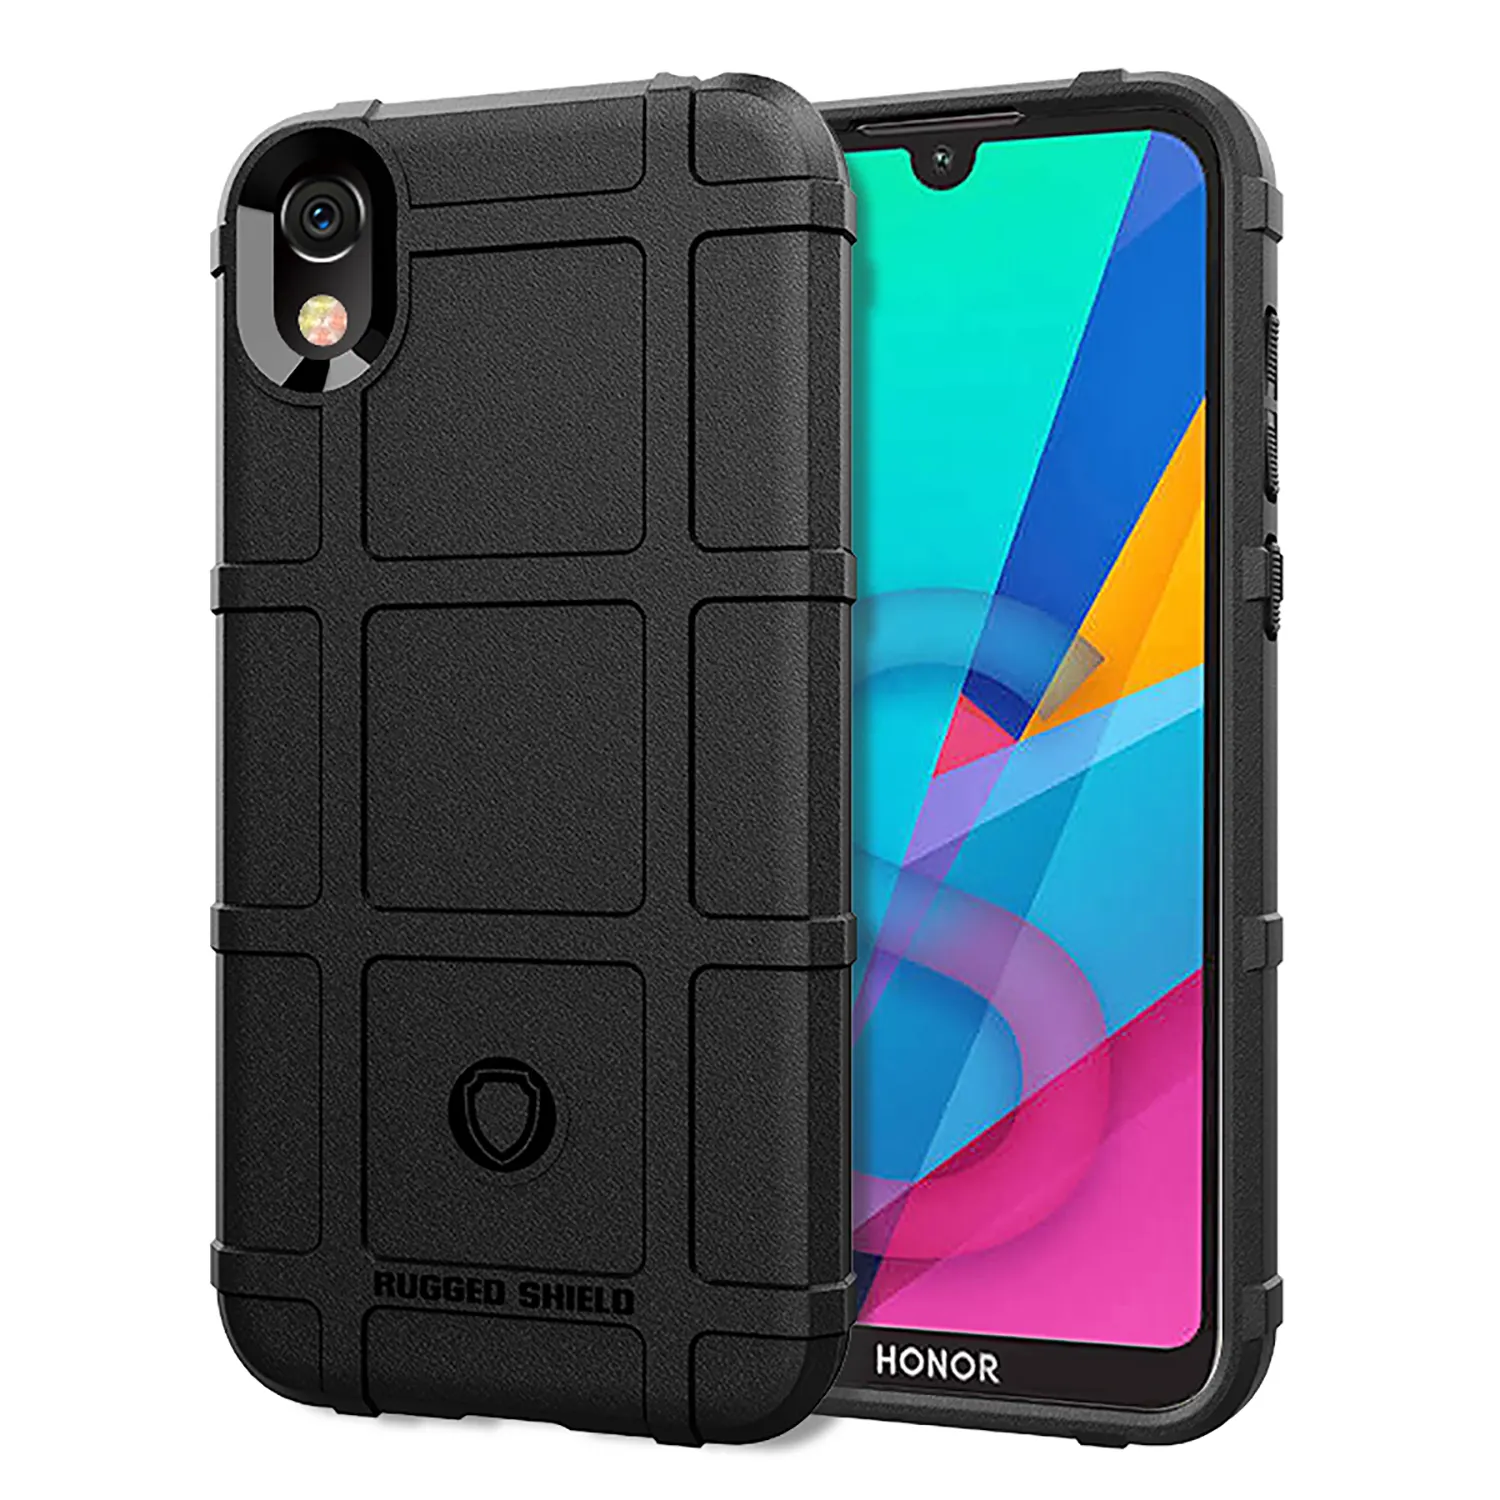 shockproof tpu mobile phone case for Huawei Honor 8S back cover